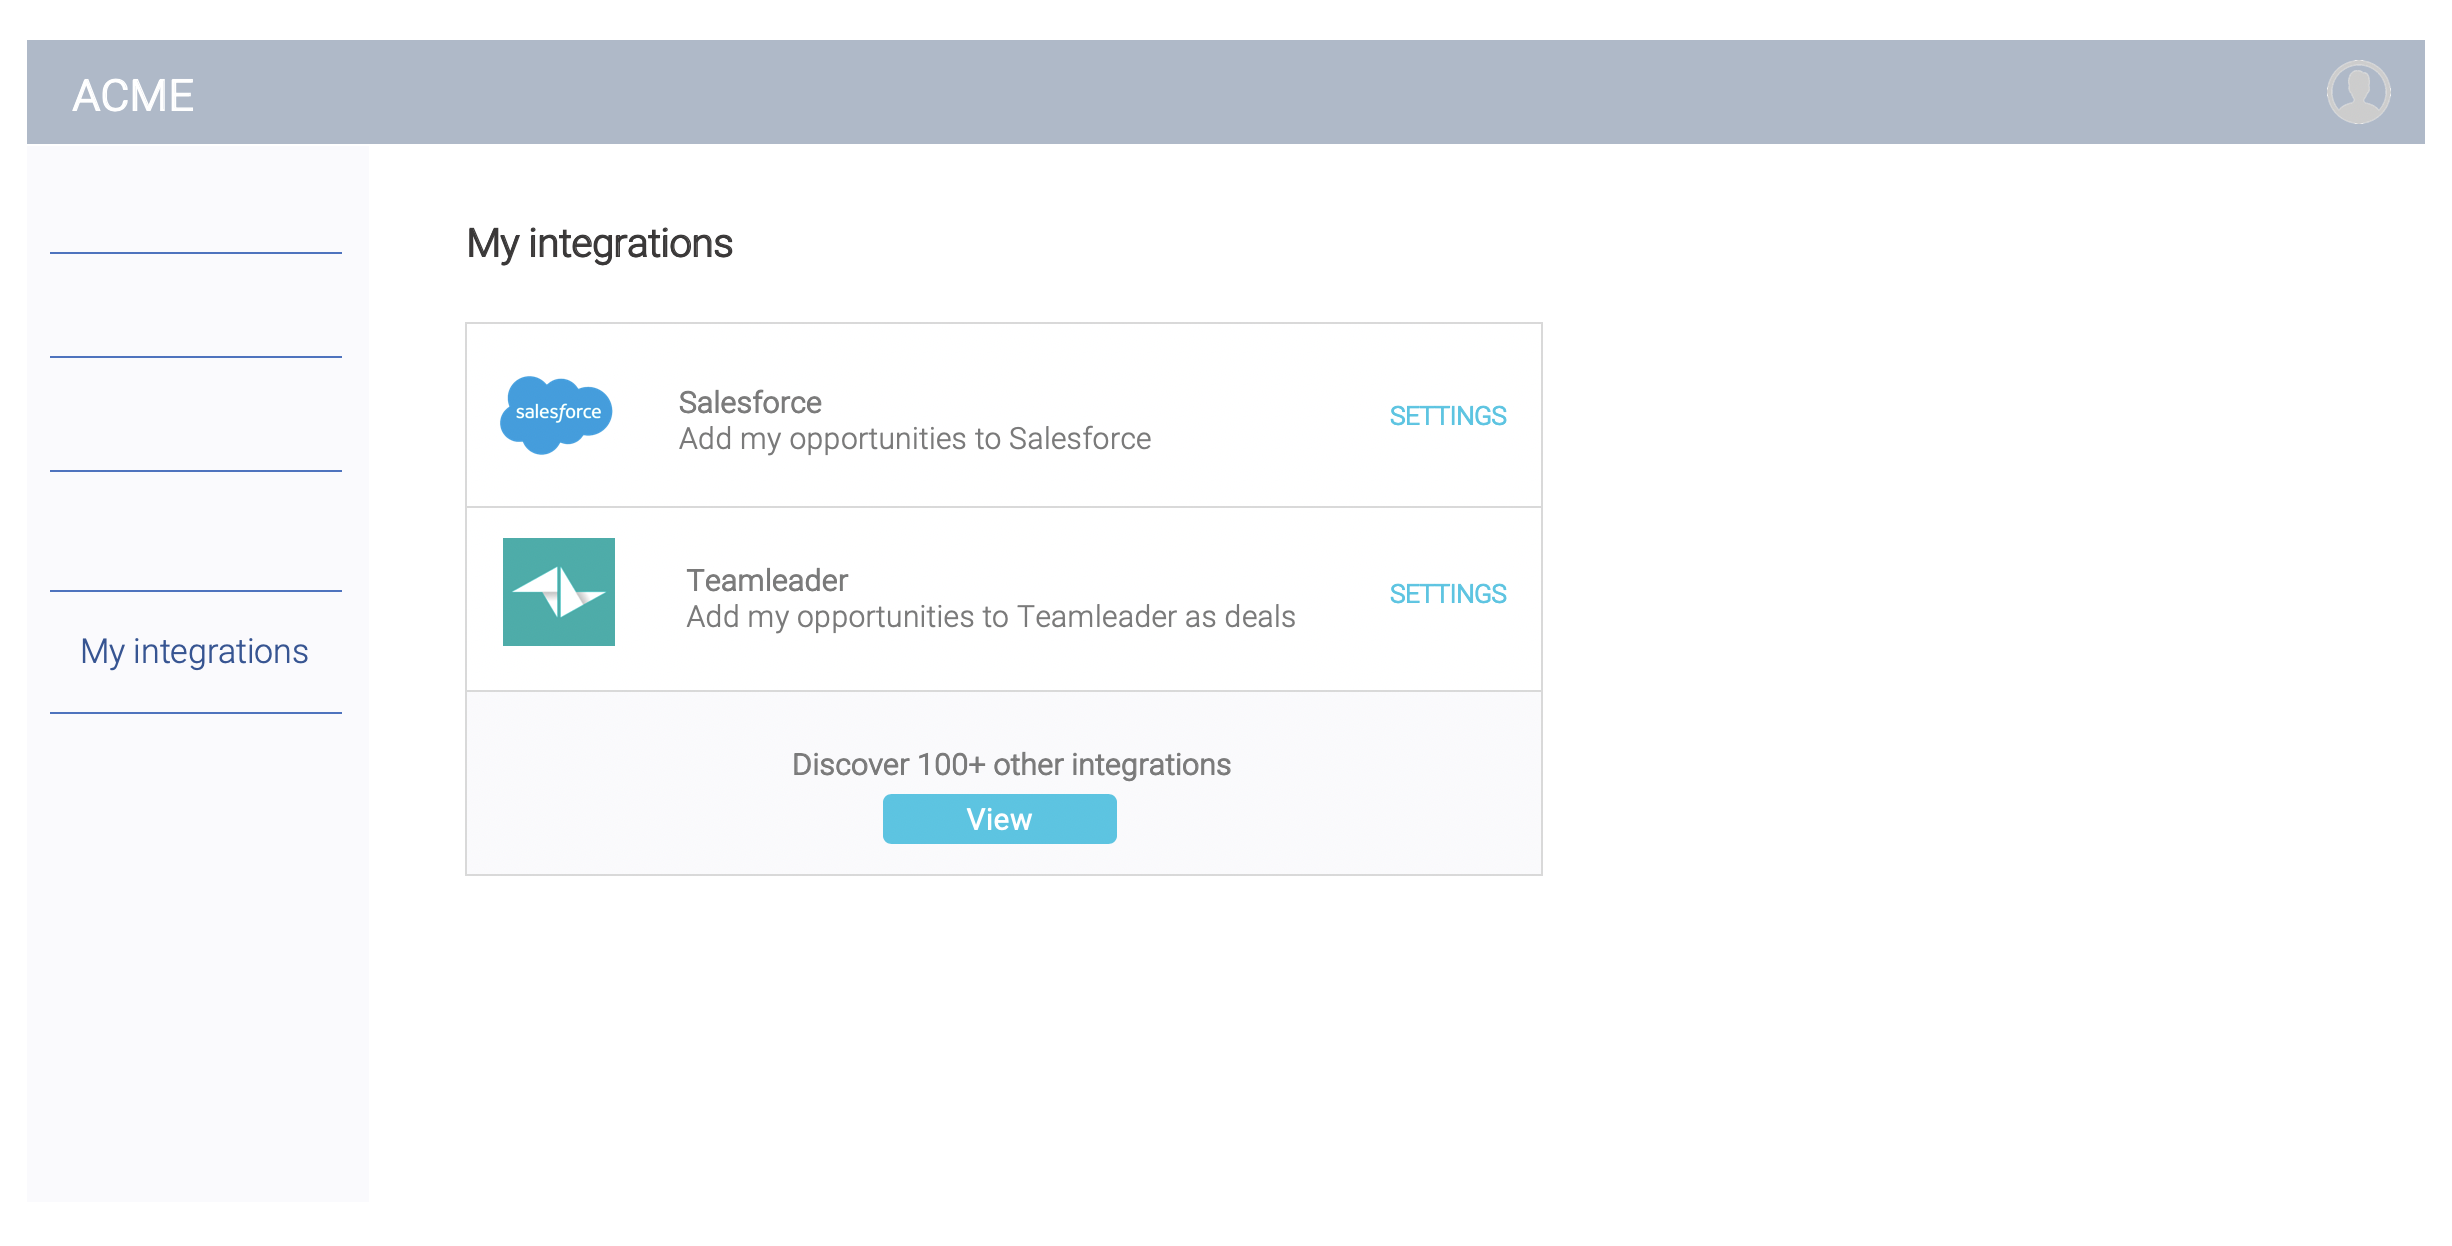 The My Integrations button shows a list of current integrations.